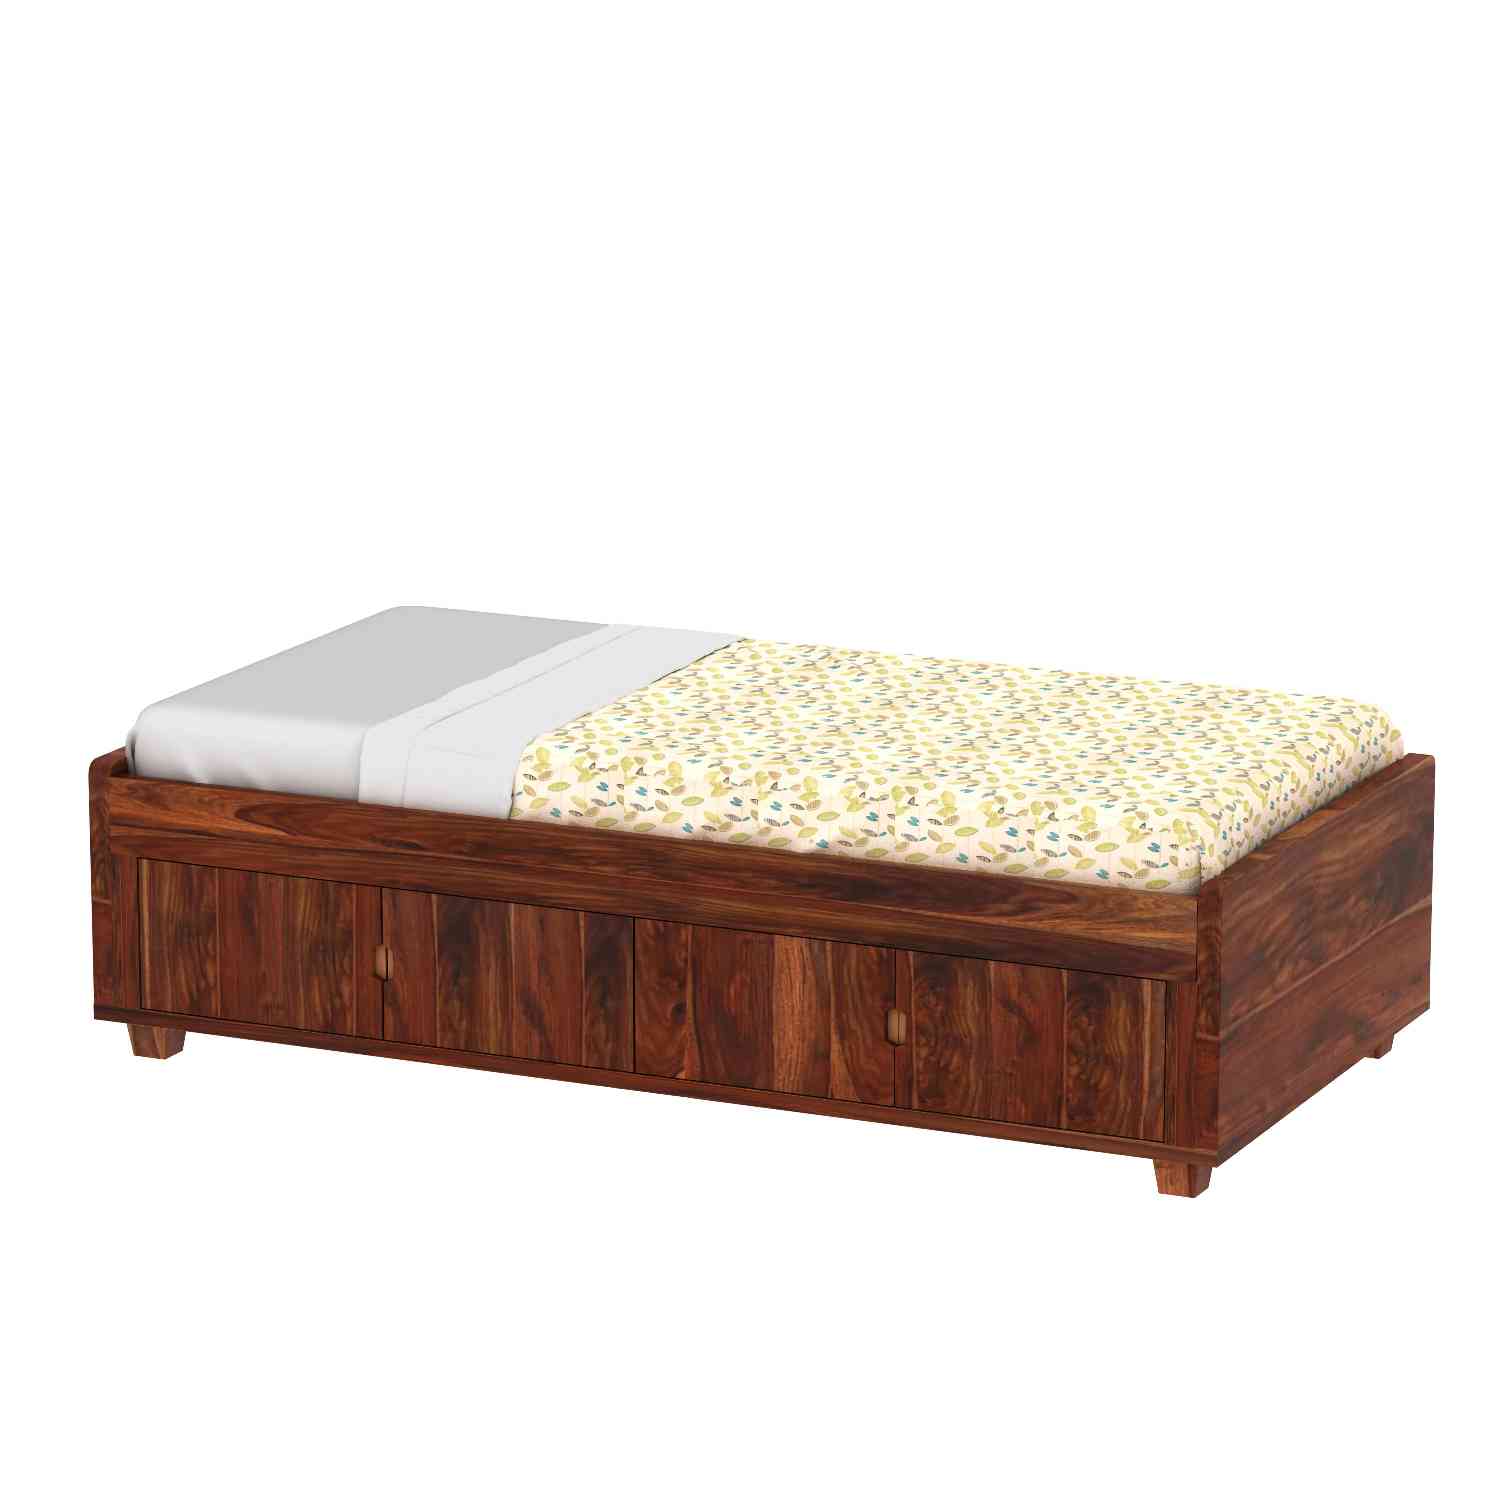 Livinn Solid Sheesham Wood Single Bed Cum Day Bed With Door Storage (With Mattress, Natural Finish)